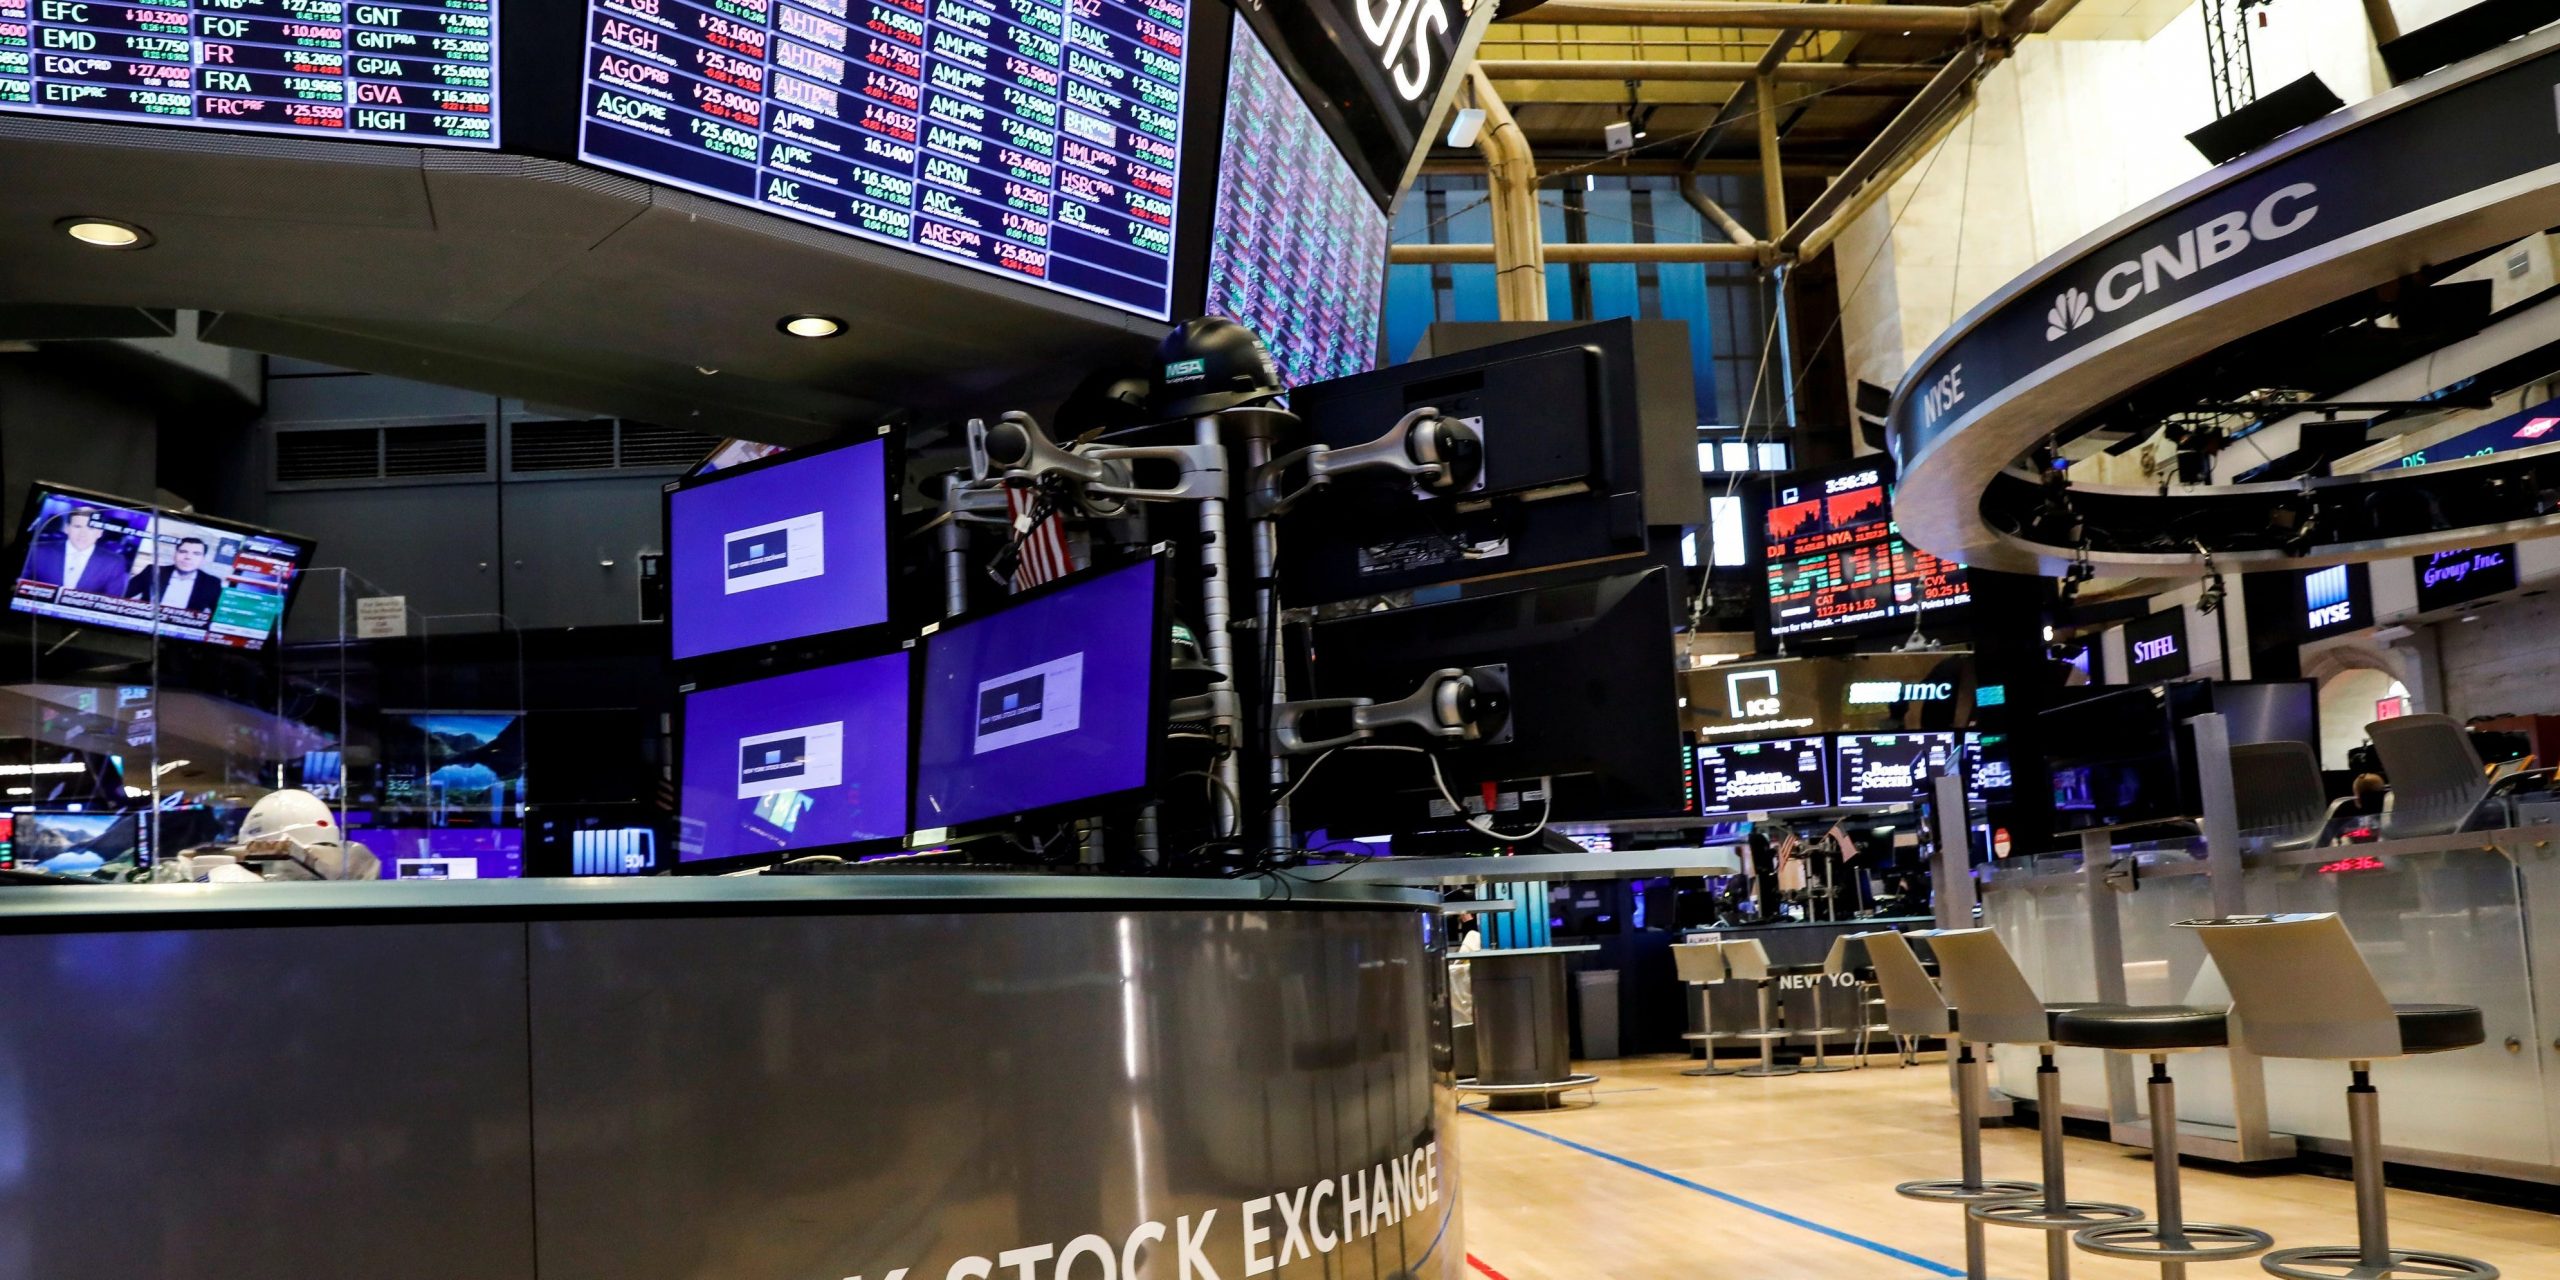 FILE PHOTO: A nearly empty trading floor is seen at the New York Stock Exchange (NYSE) in New York, U.S., May 22, 2020. REUTERS/Brendan McDermid/File Photo